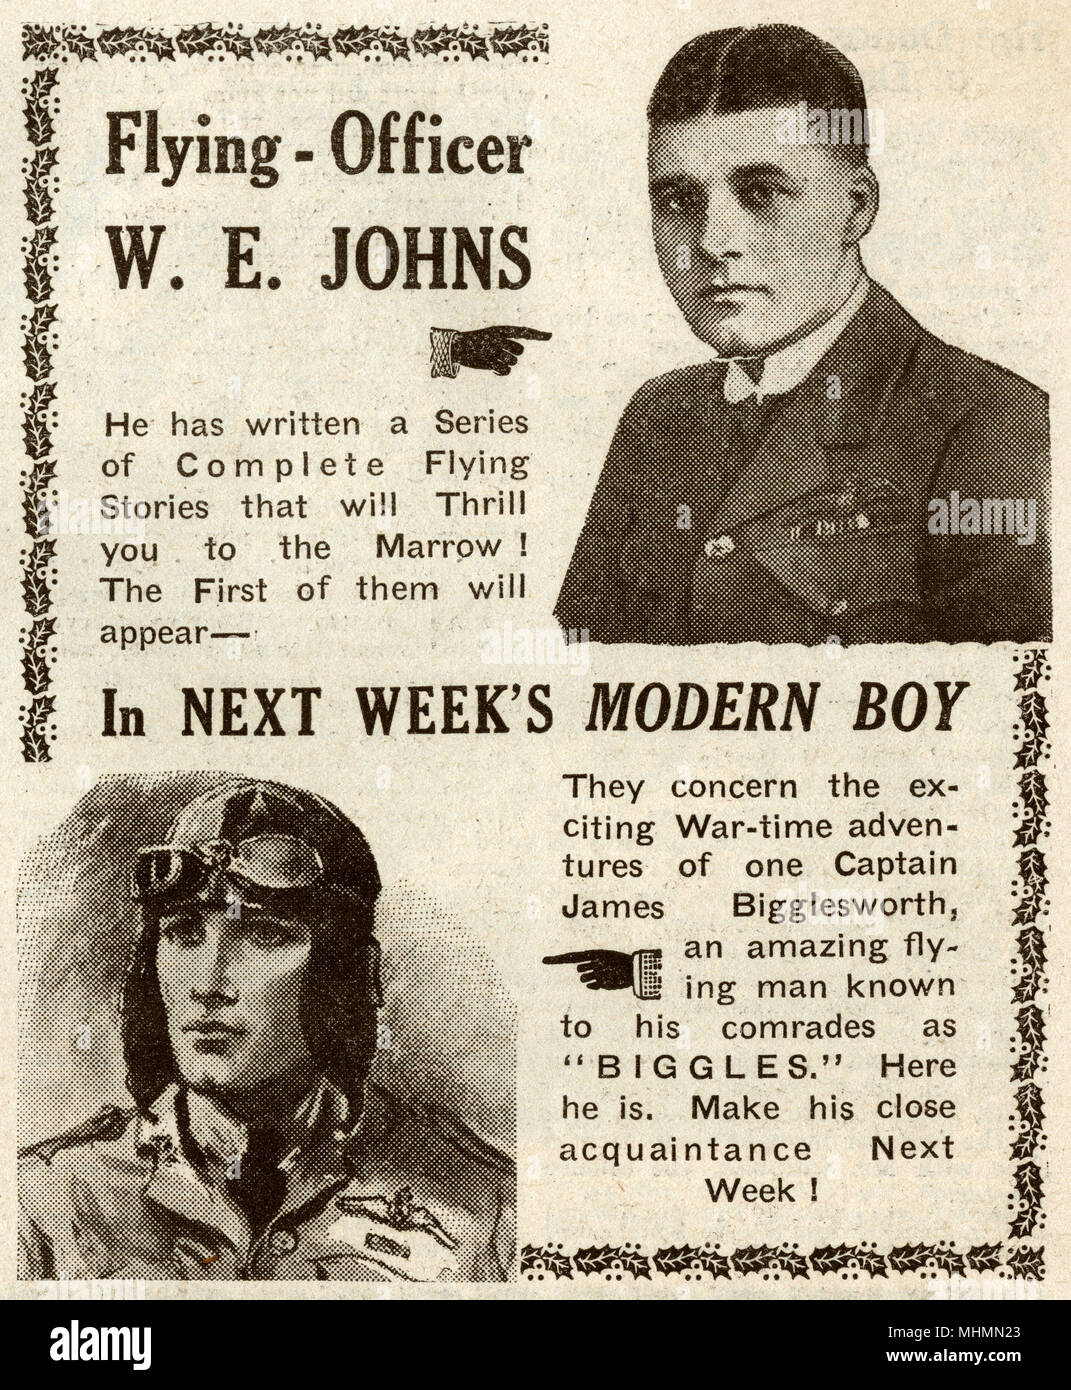 Advertisement in The Modern Boy magazine for the forthcoming series of stories written by Flying Officer W. E. Johns concerning the wartime adventures of Captain James Bigglesworth, known to his comrades as Biggles.  William Earl Johns (5 February 1893  21 June 1968) was an English pilot and writer of adventure stories, usually written under the pen name Captain W. E. Johns. He is best remembered as the creator of the ace pilot and adventurer Biggles.     Date: 1932 Stock Photo